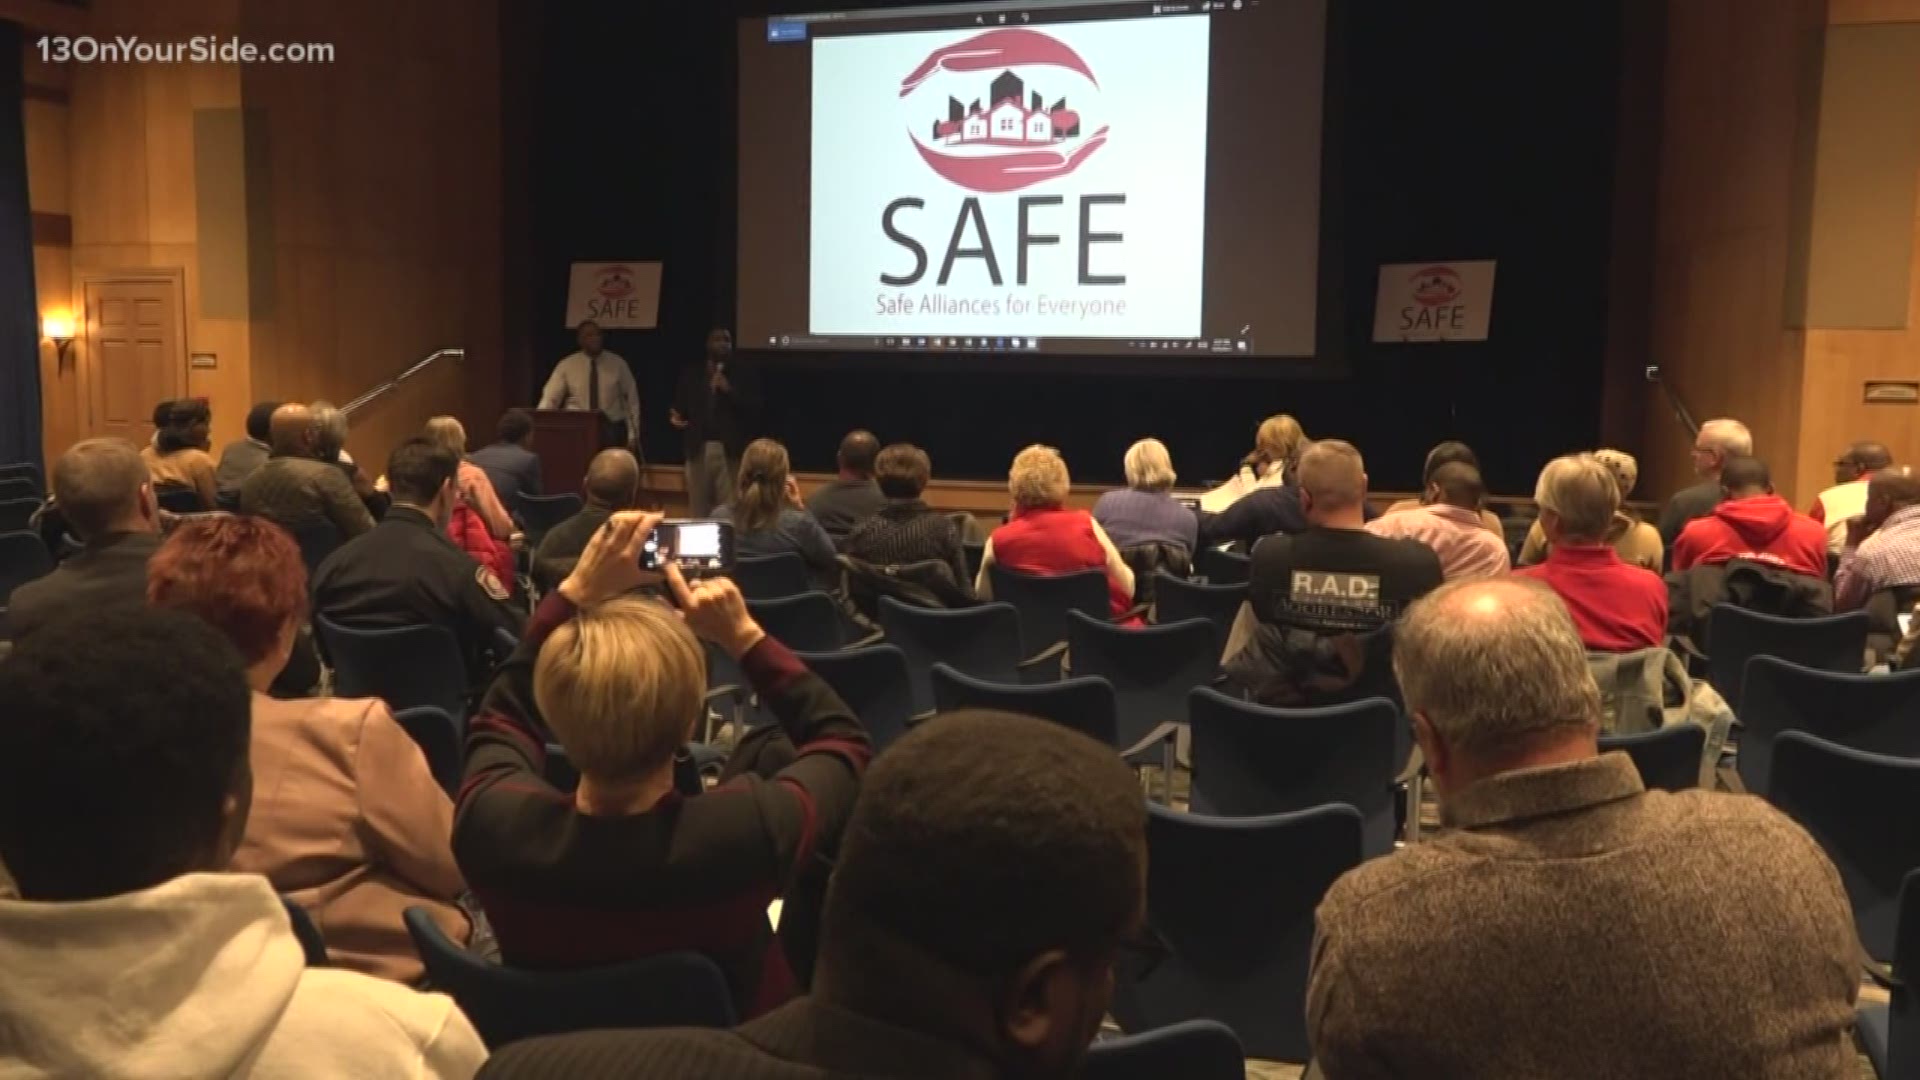 In the last few days, there is no question that violence in Grand Rapids neighborhoods needs to addresses. There have been six shootings in the last four days. The City of Grand Rapids is hoping community members have new and creative ideas that will help to reduce violence in neighborhoods.